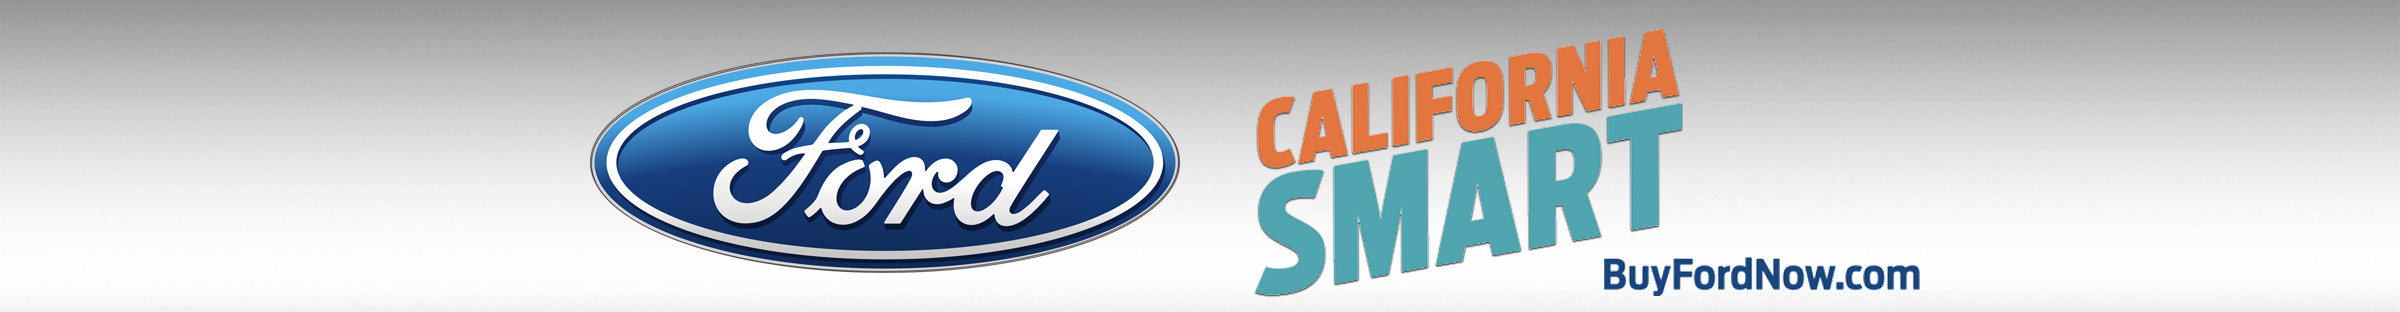 Stop by and experience a test drive of the latest models from Ford at The Sacramento International Auto Show. There’s no-pressure, no-hassle opportunity, and no additional charge!